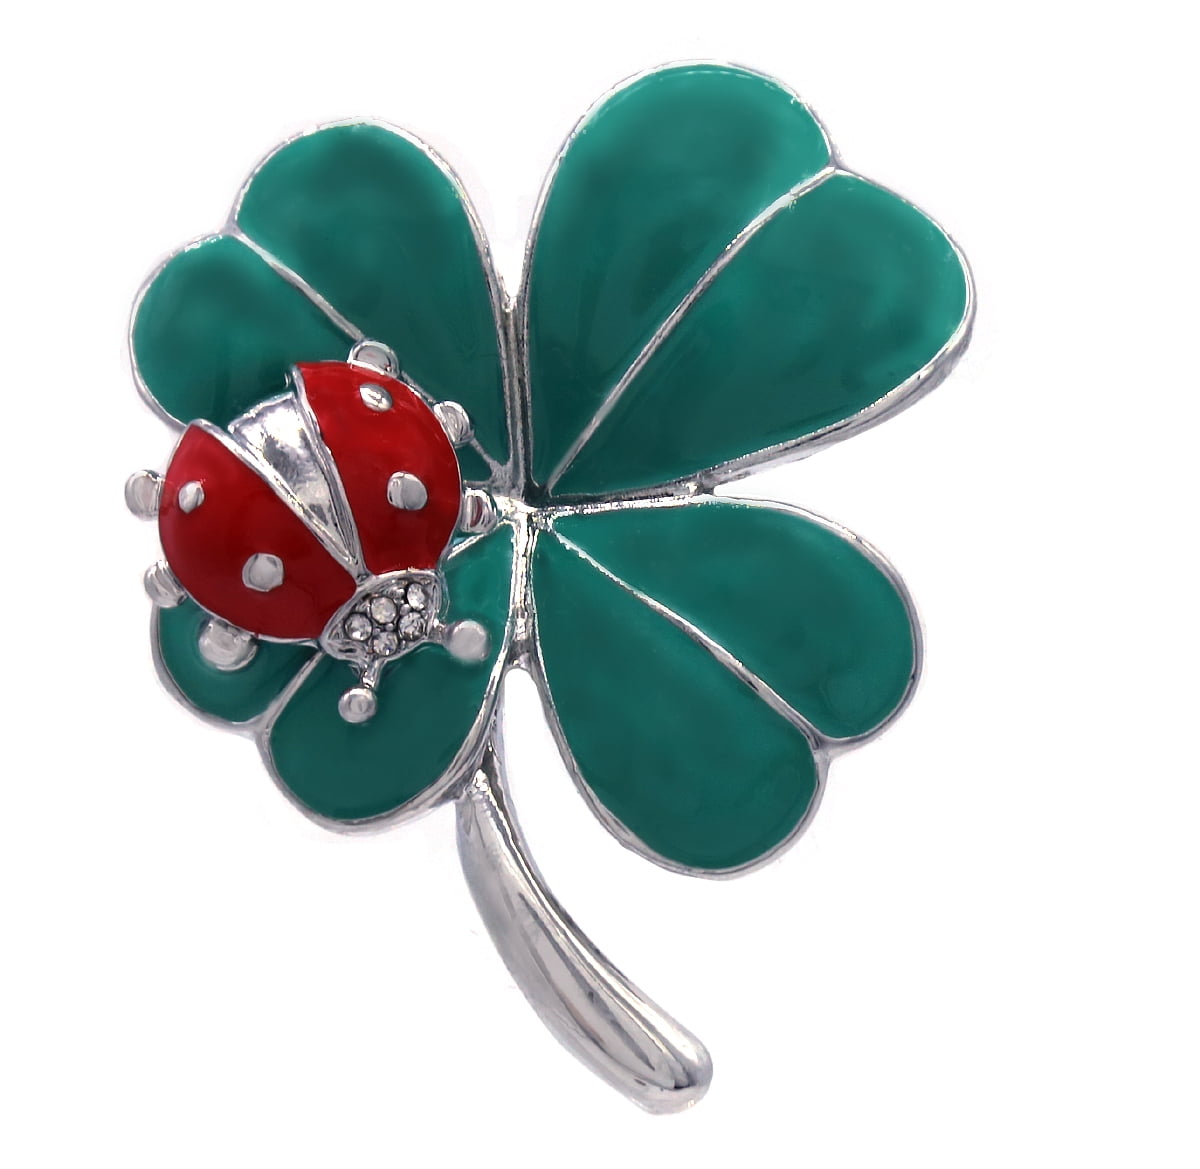 Poli Police CL-001 Shamrock Commendation Bar Pin Fire Fighter Emerald Society